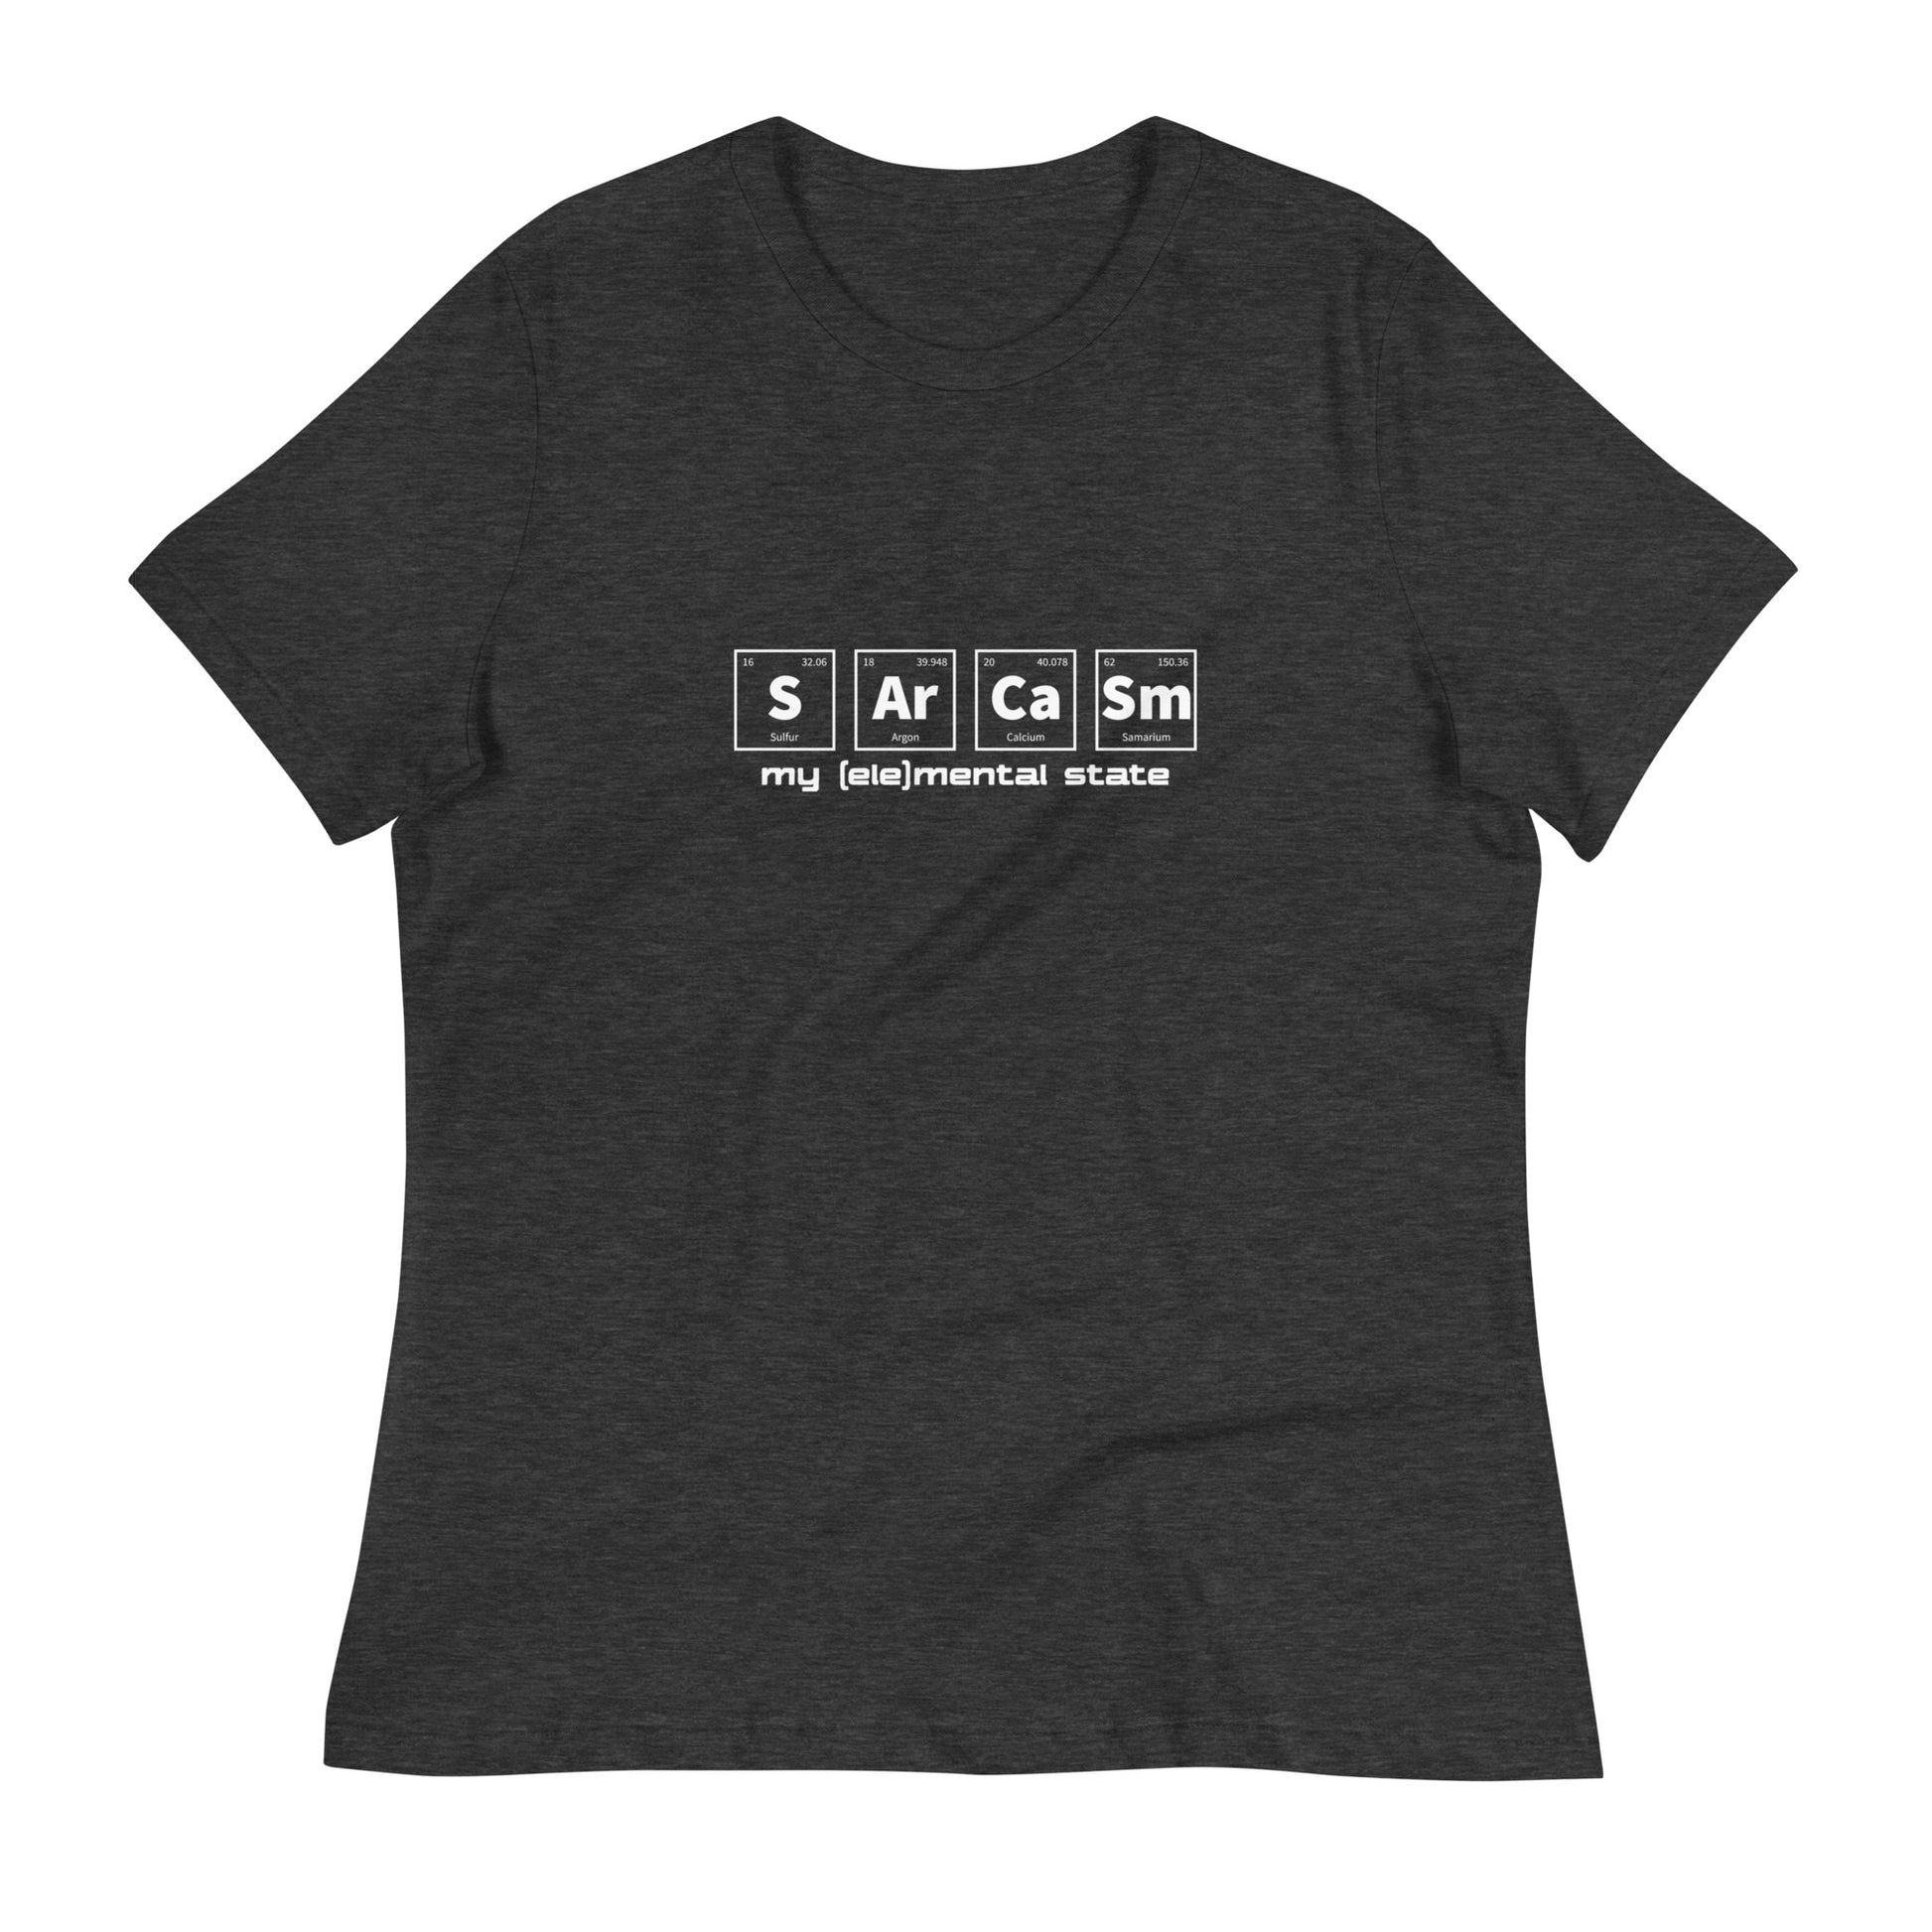 Dark Heather Grey women's relaxed fit t-shirt with graphic of periodic table of elements symbols for Sulfur (S), Argon (Ar), Calcium (Ca), and Samarium (Sm) and text "my (ele)mental state"